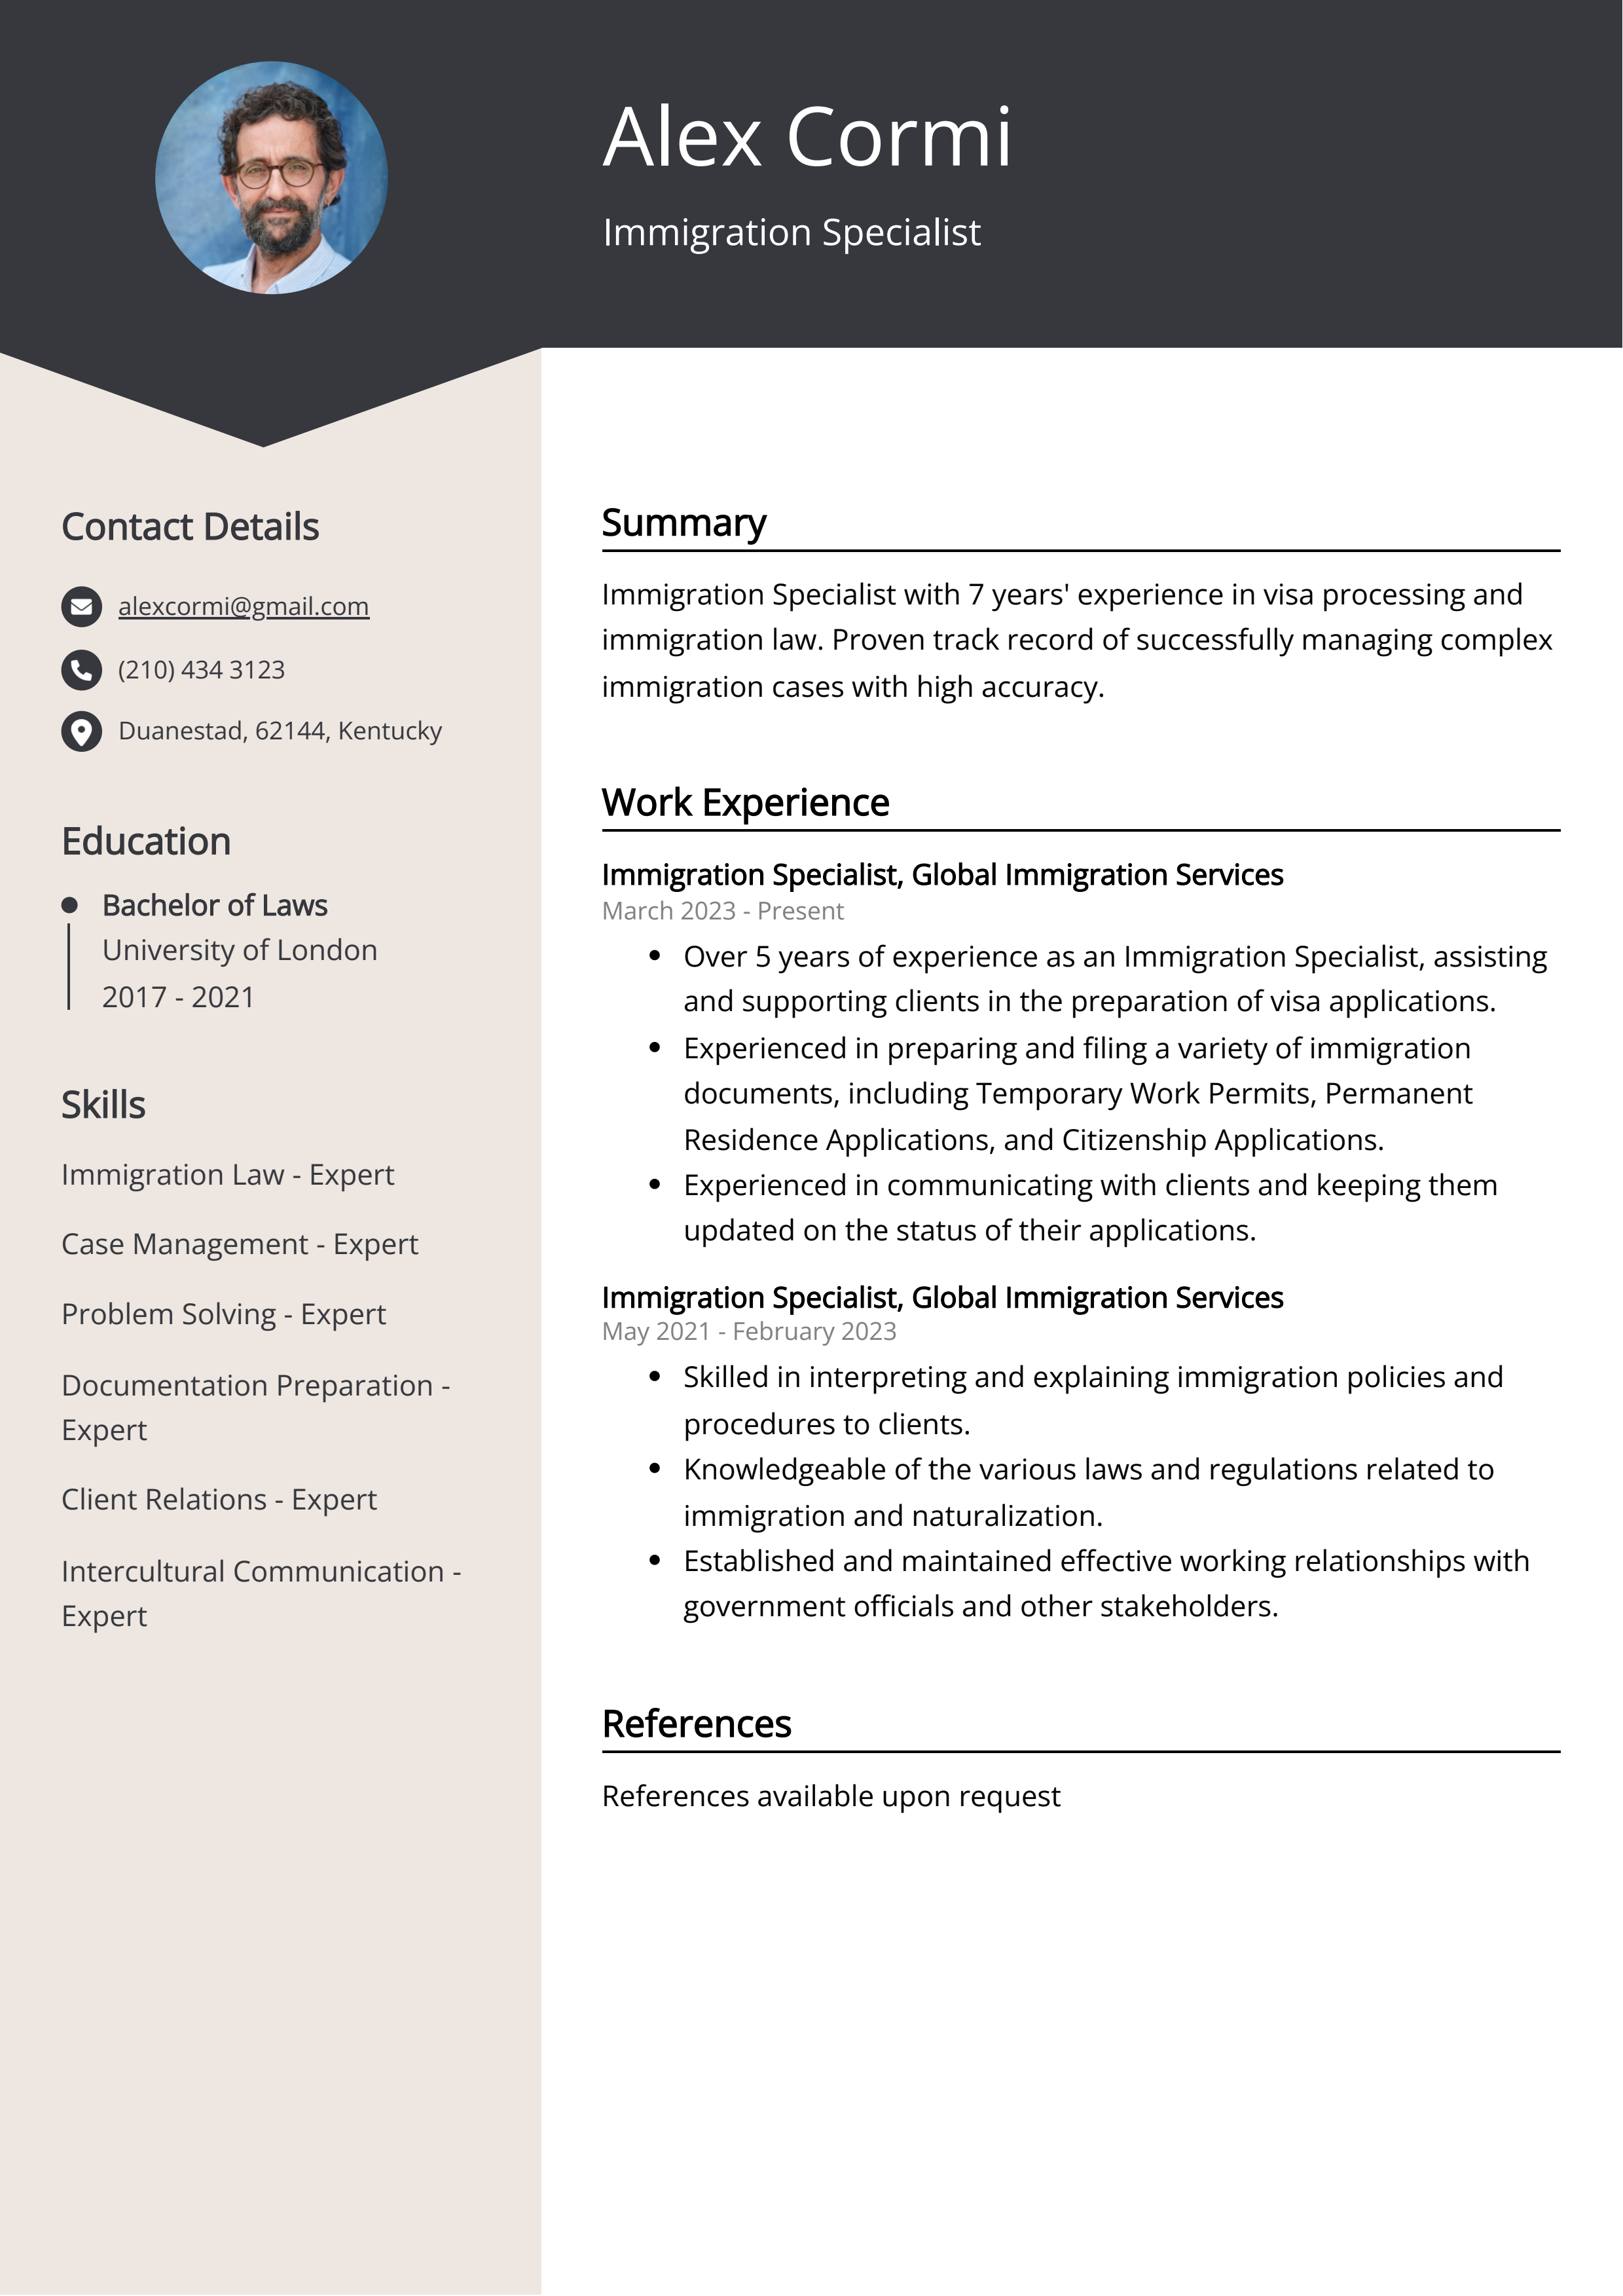 Immigration Specialist CV Example